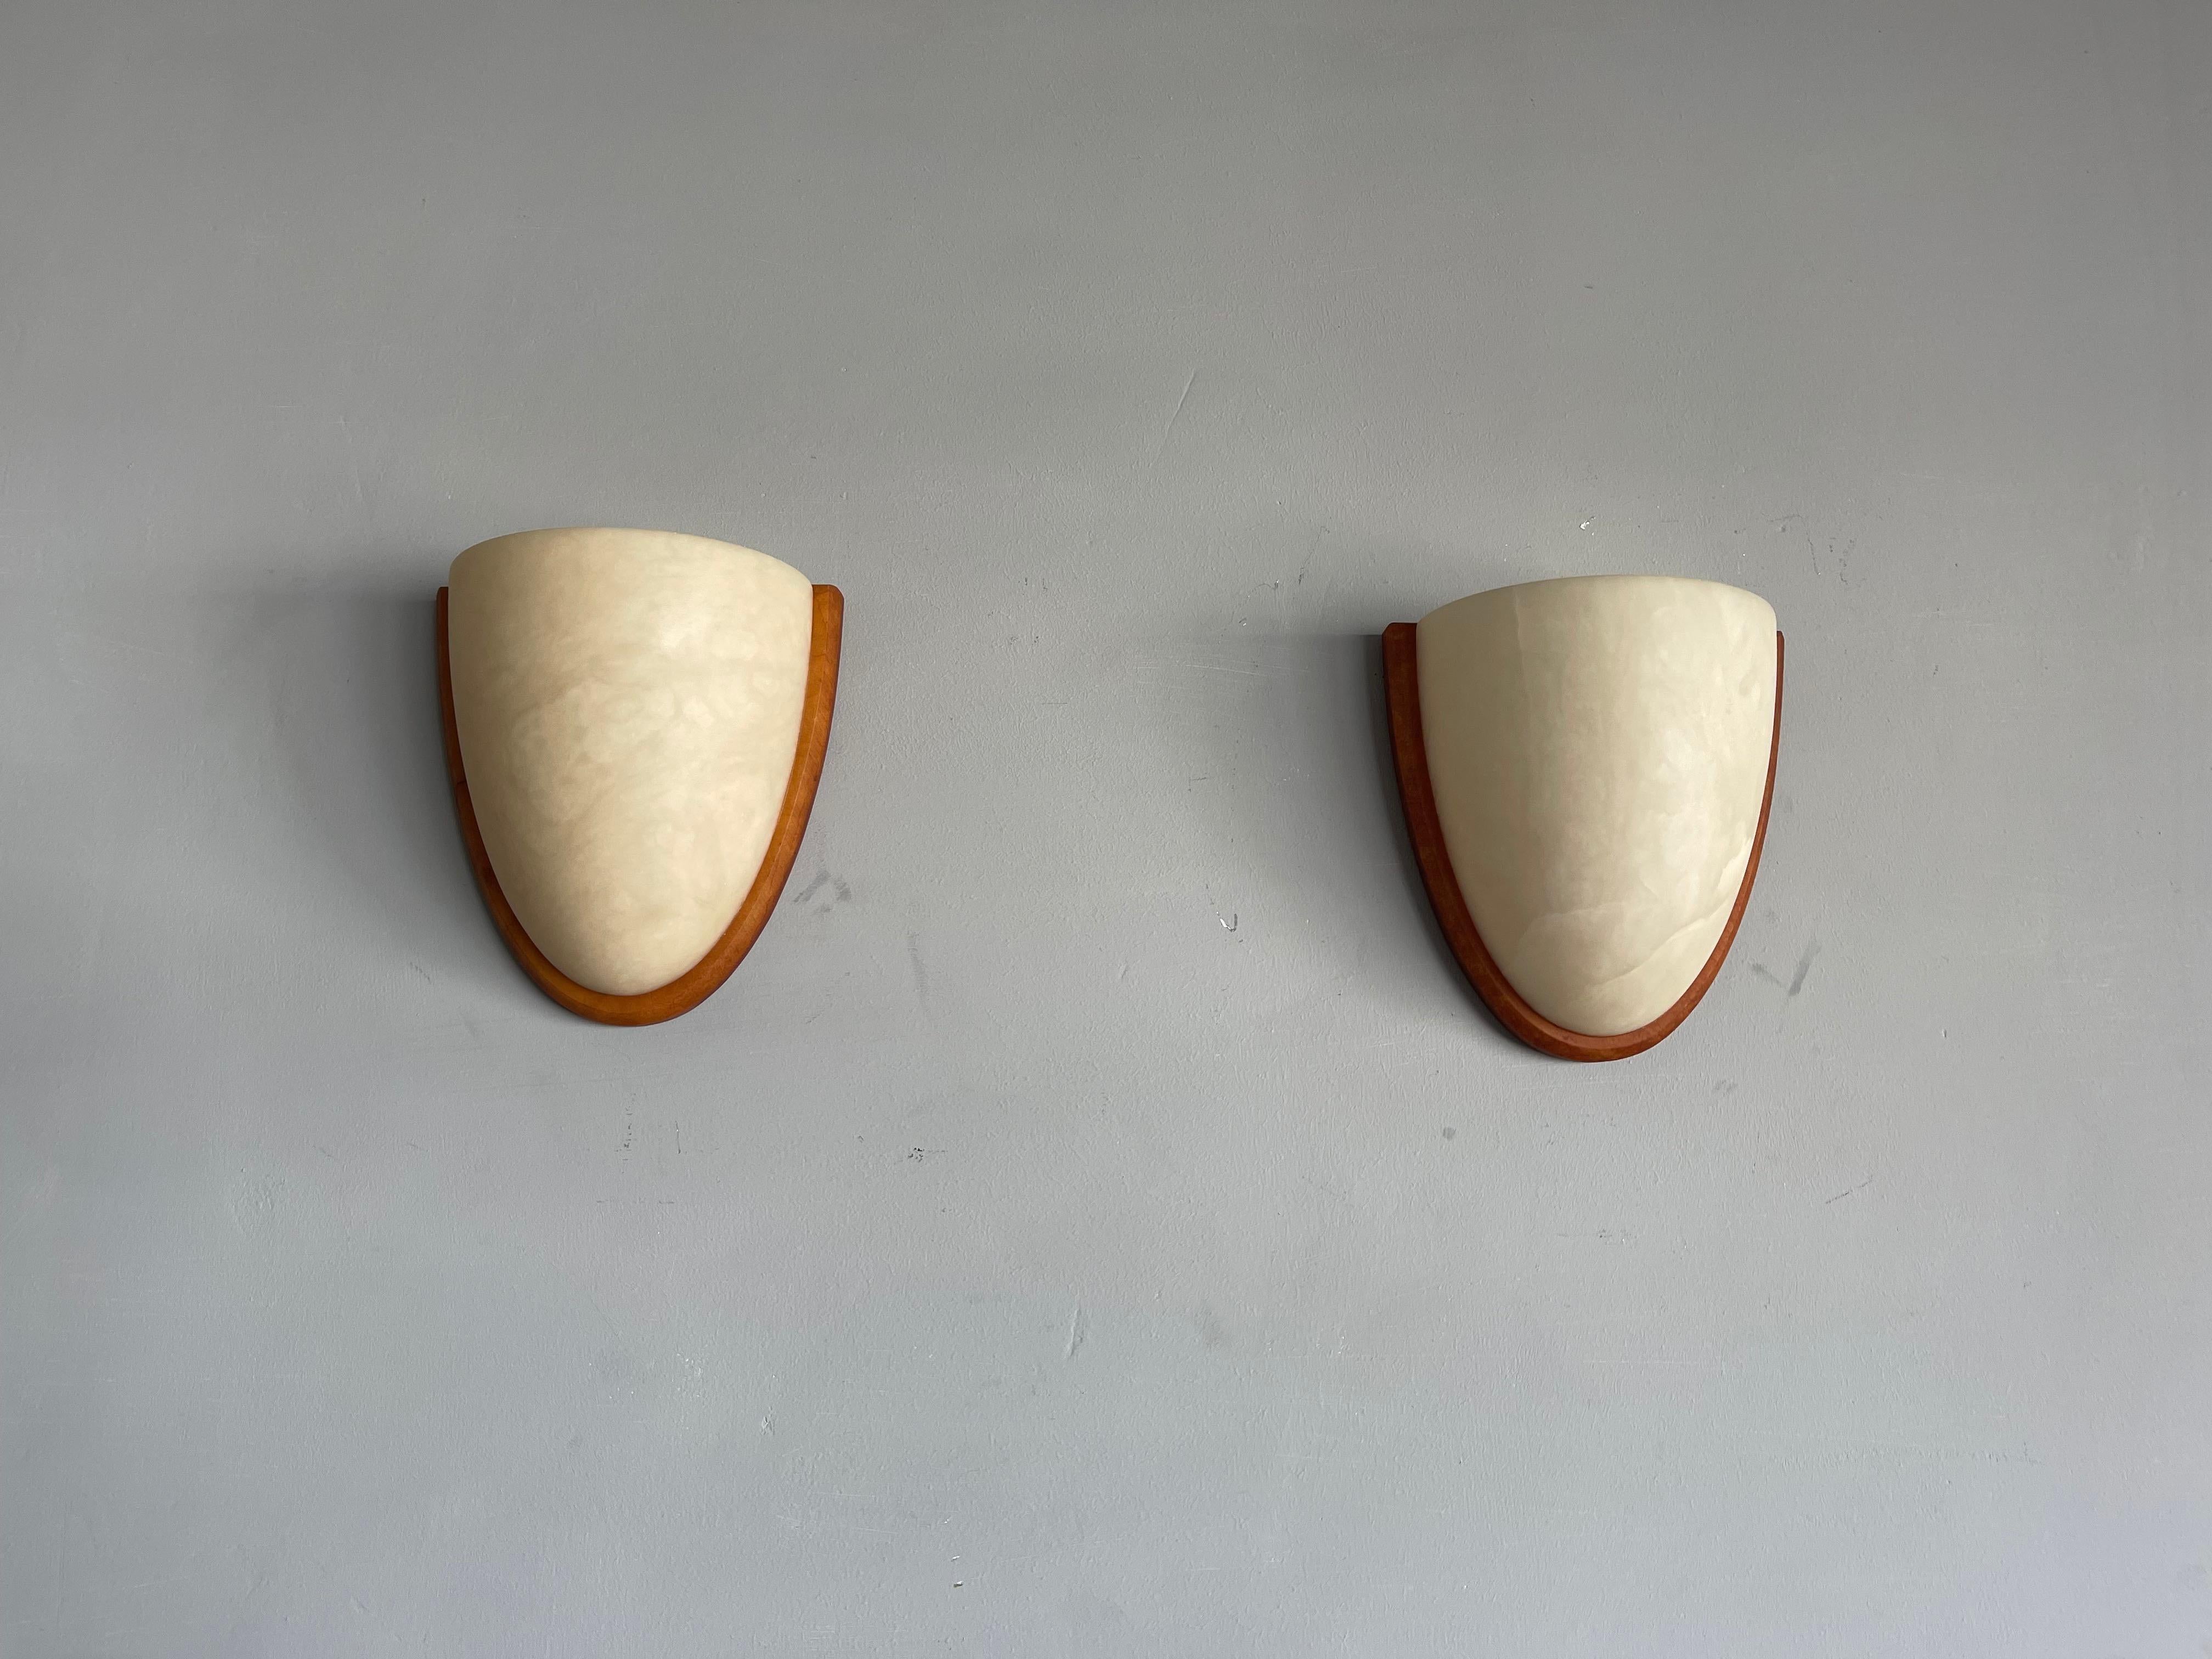 Hand-Crafted Unique Art Deco Style Cocoon Shape Midcentury Modern Era Alabaster Wall Sconces 